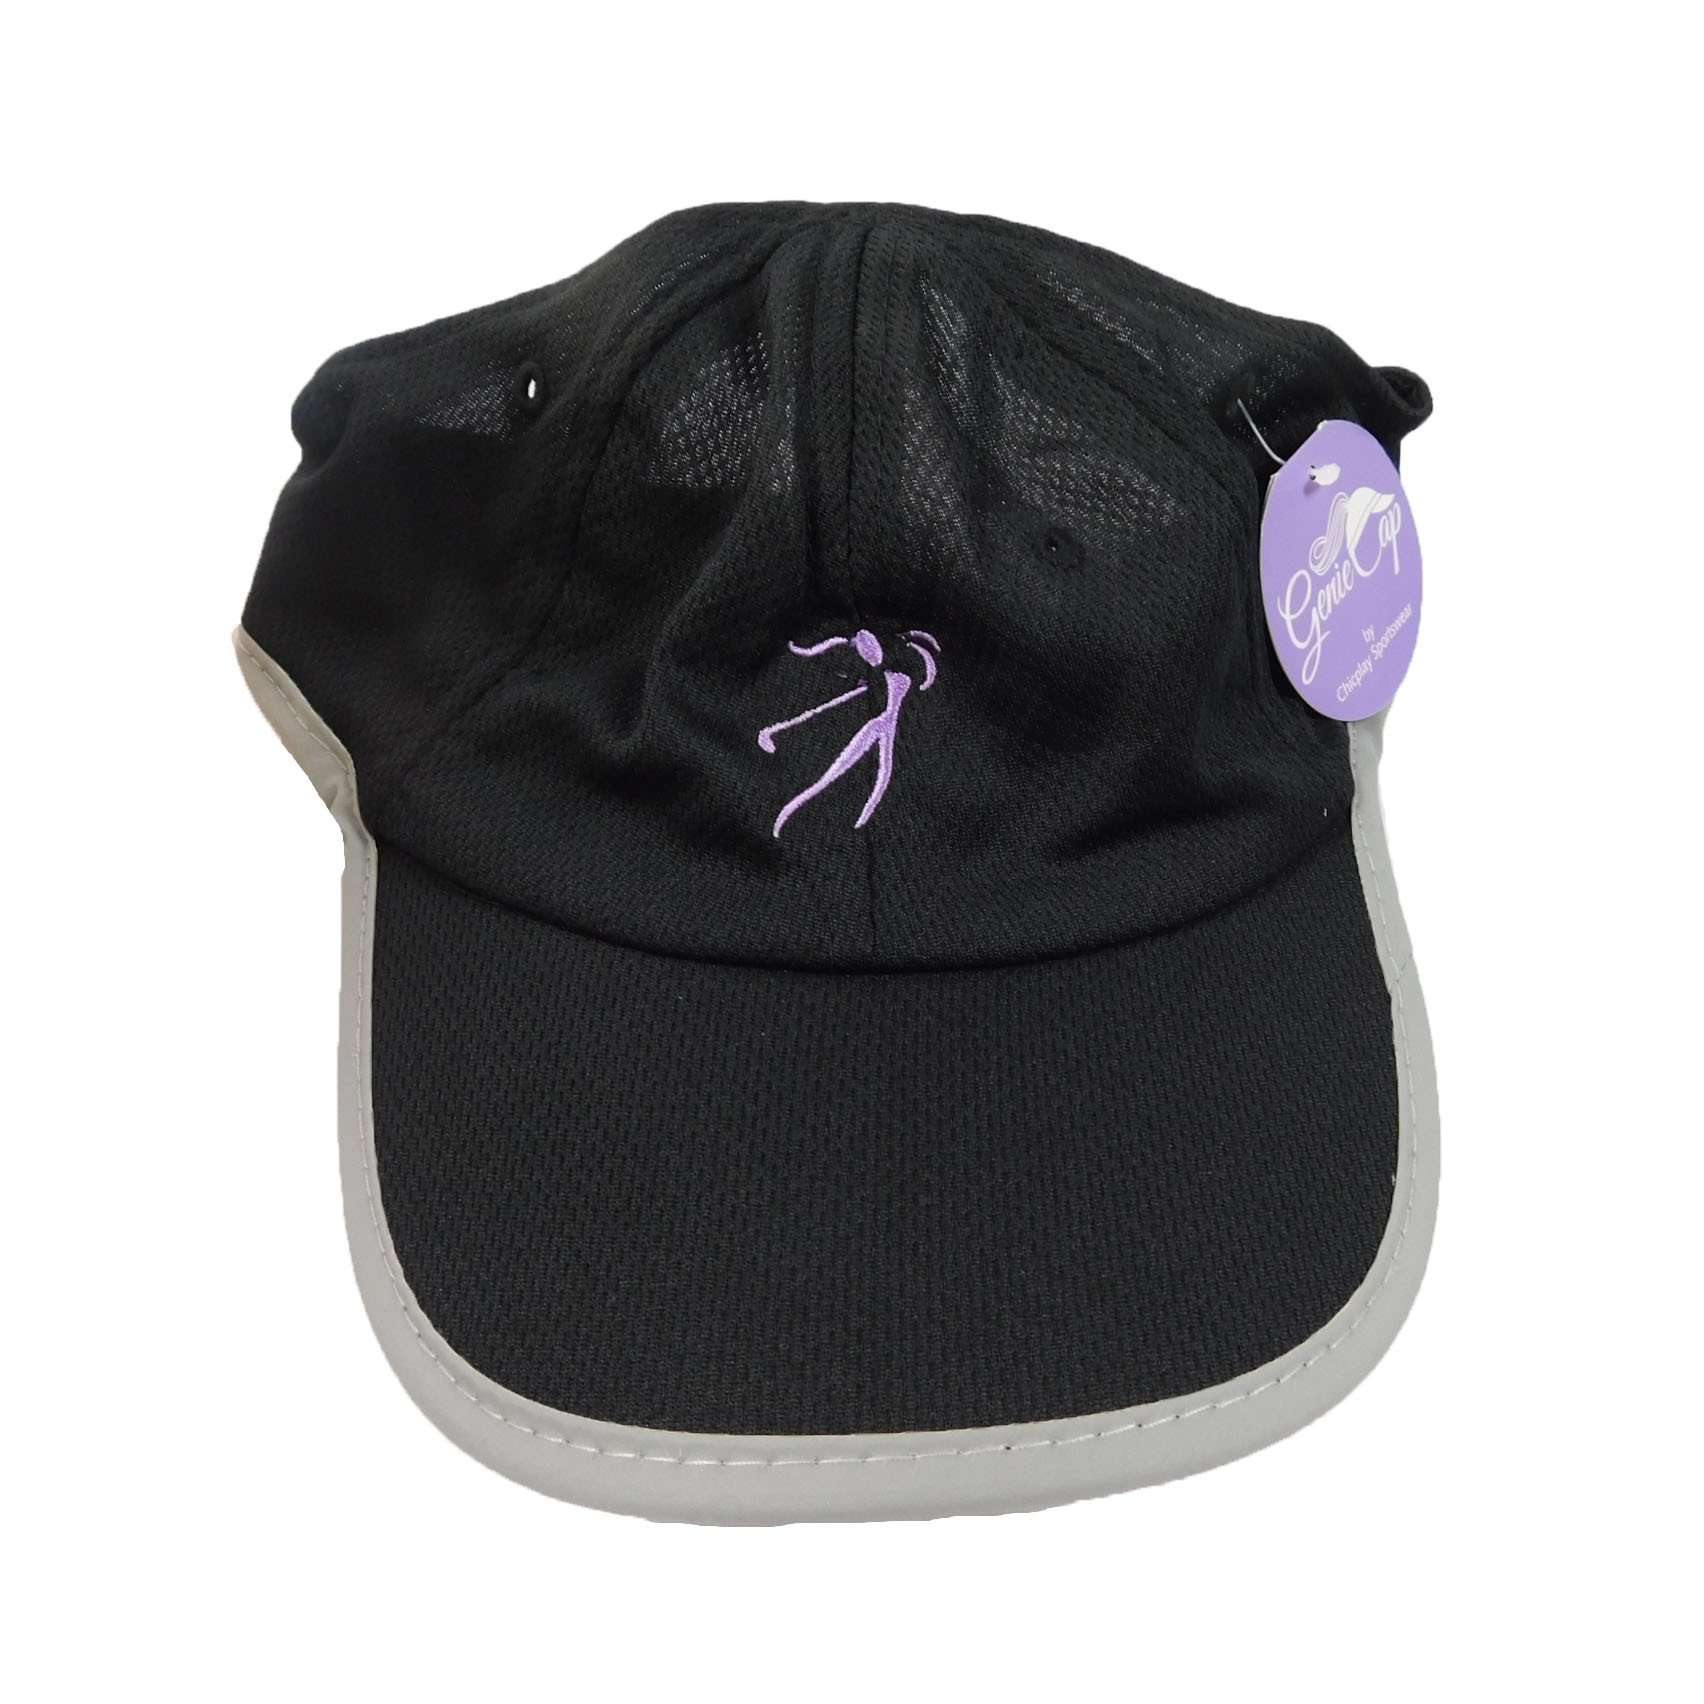 Ginnie Cap in Rayon Mesh with Golf Logo Cap Great hats by Karen Keith GCME-Gbk Black  